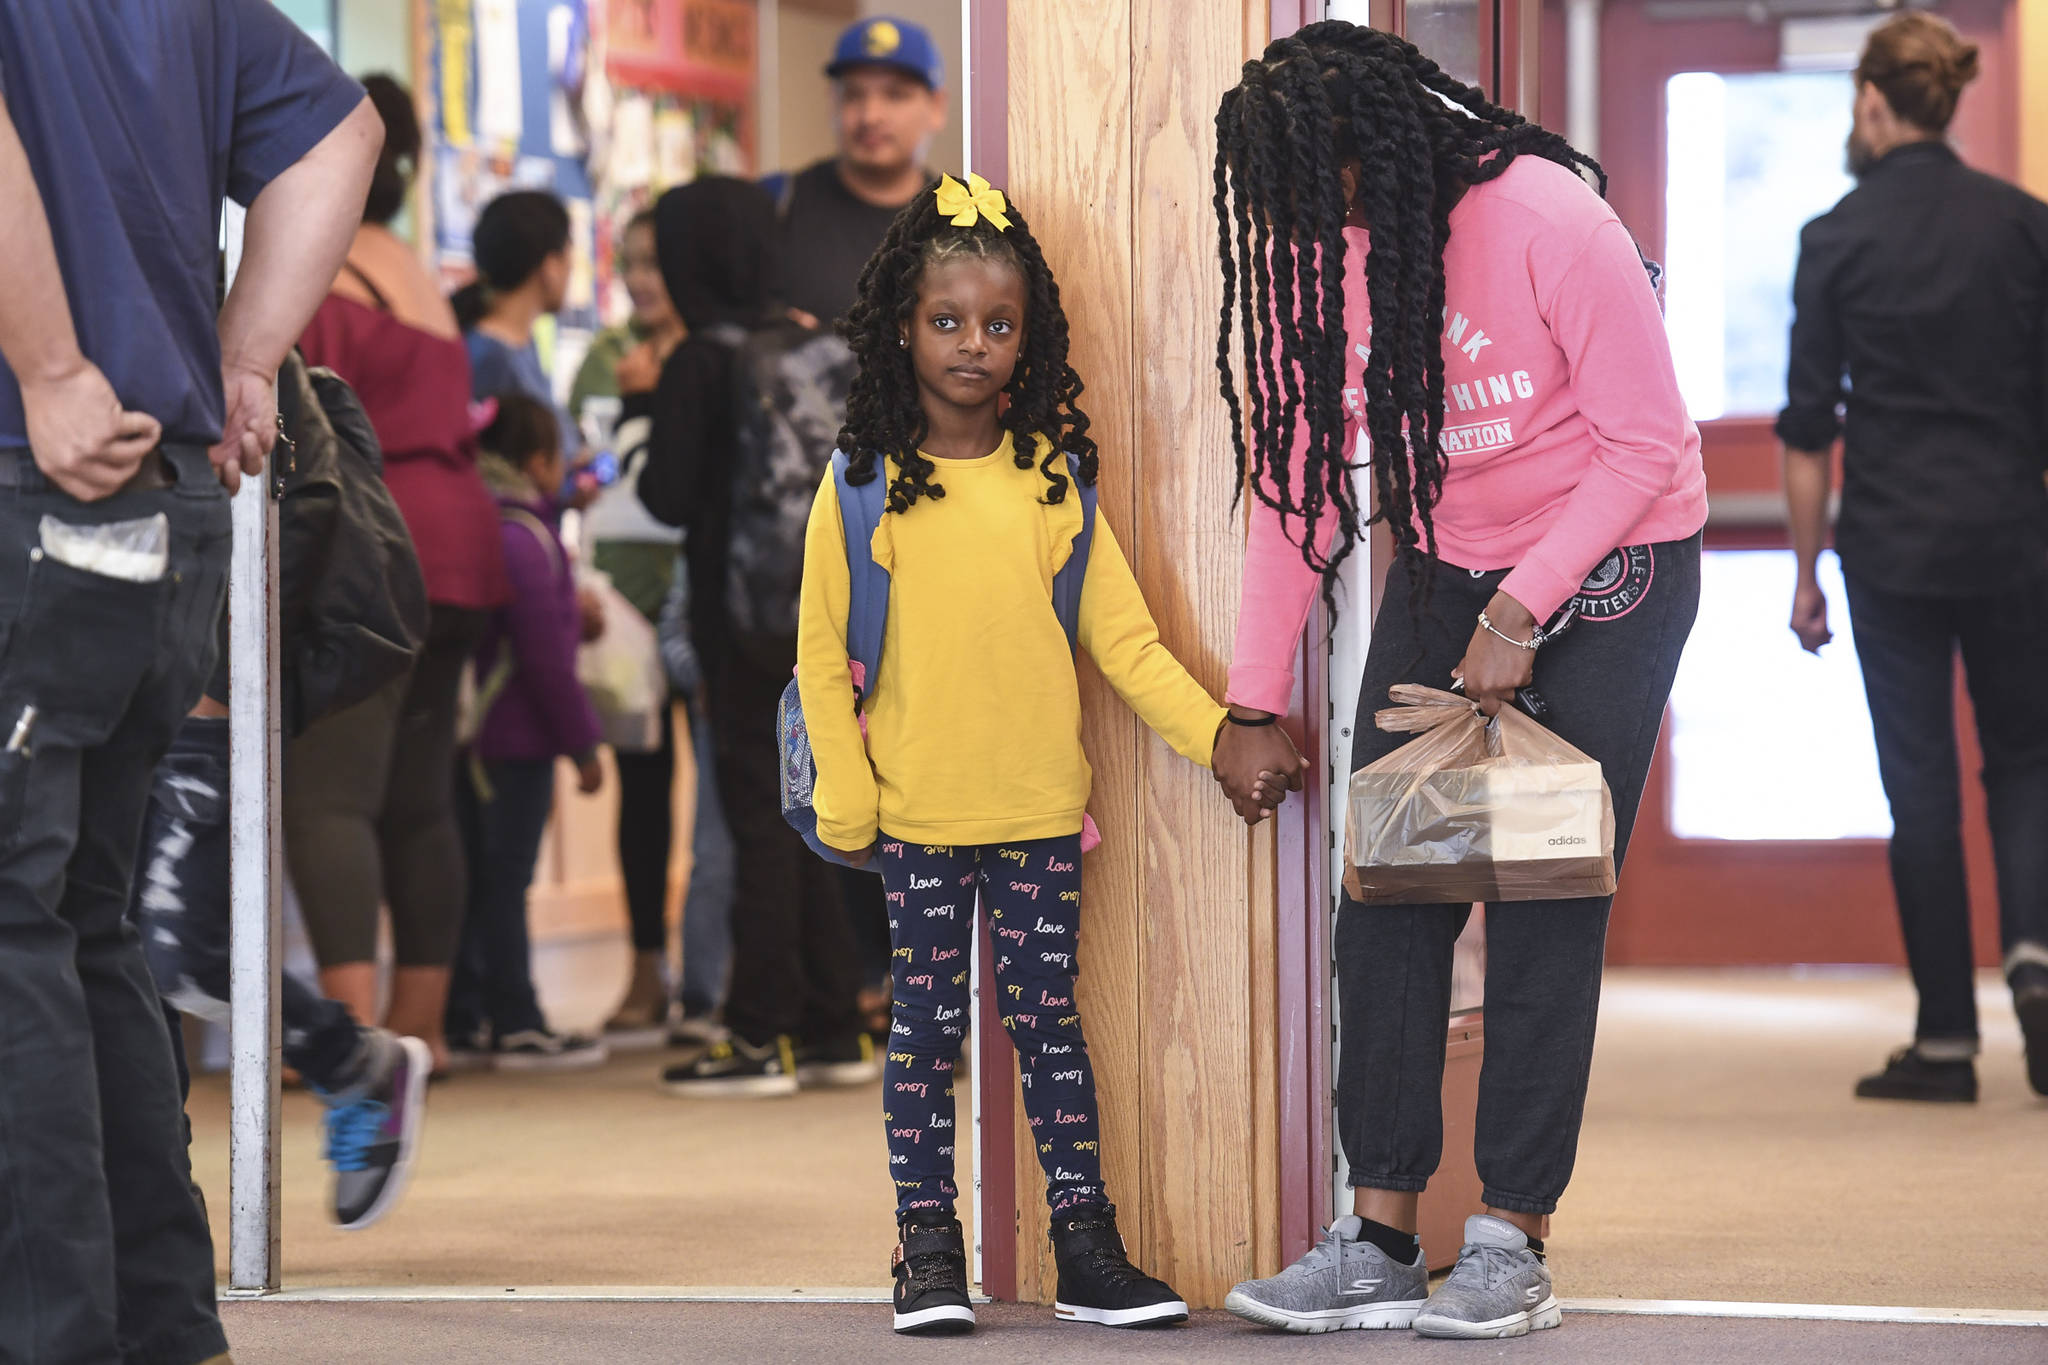 Ariyah Allen, holds hands with her mother, Odette, after arriving for the first day of school at Riverbend Elementary School on Monday, Aug. 19, 2019. (Michael Penn | Juneau Empire)